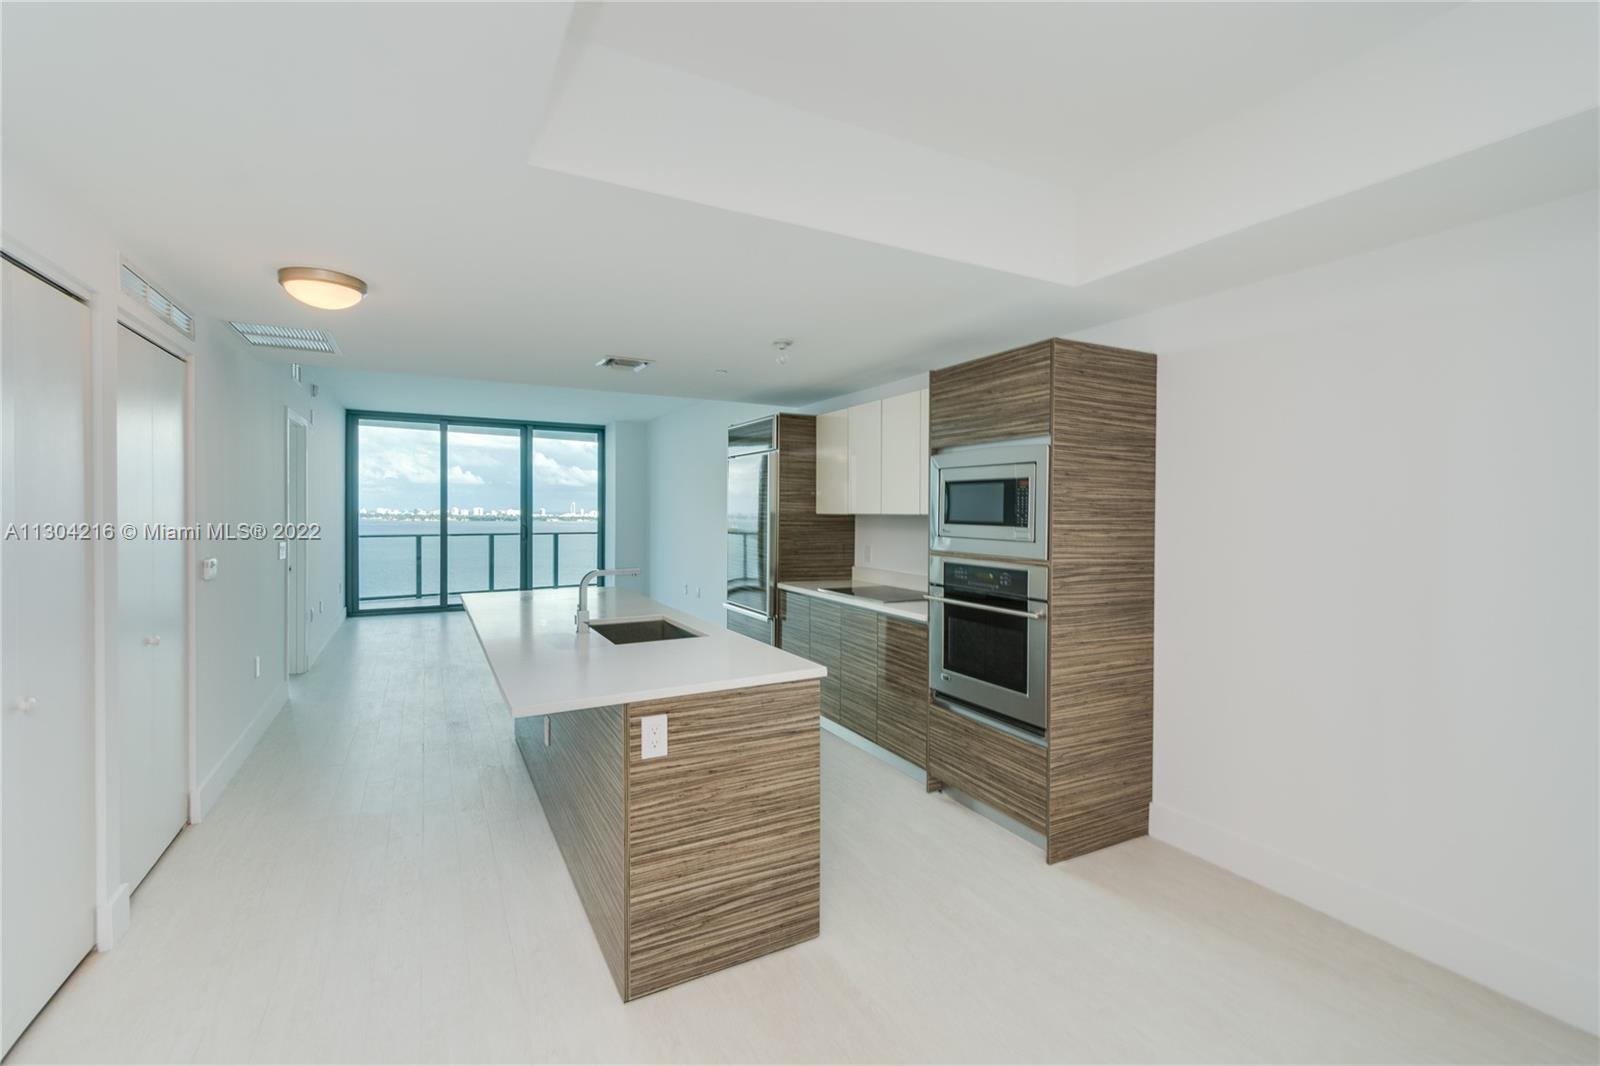 a living room with stainless steel appliances kitchen island a large window and kitchen view